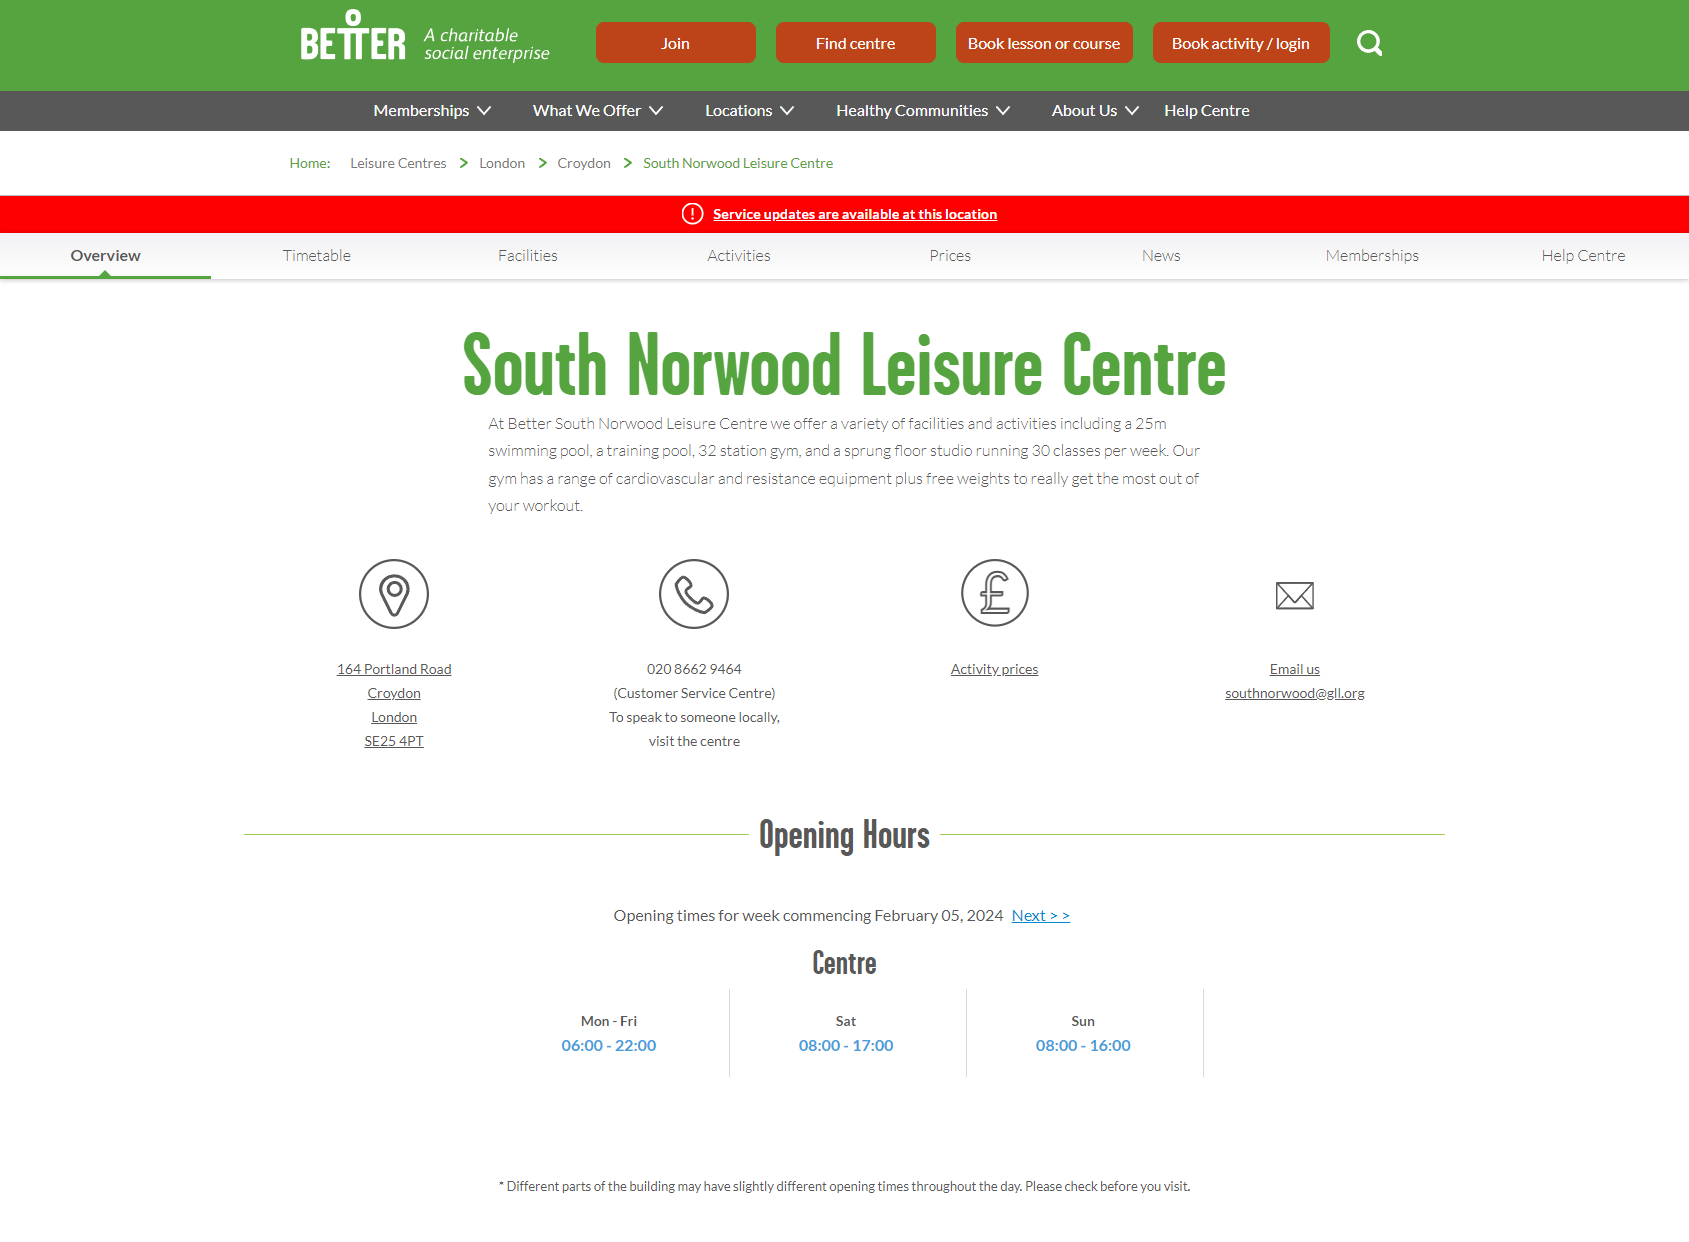 South Norwood Leisure Centre